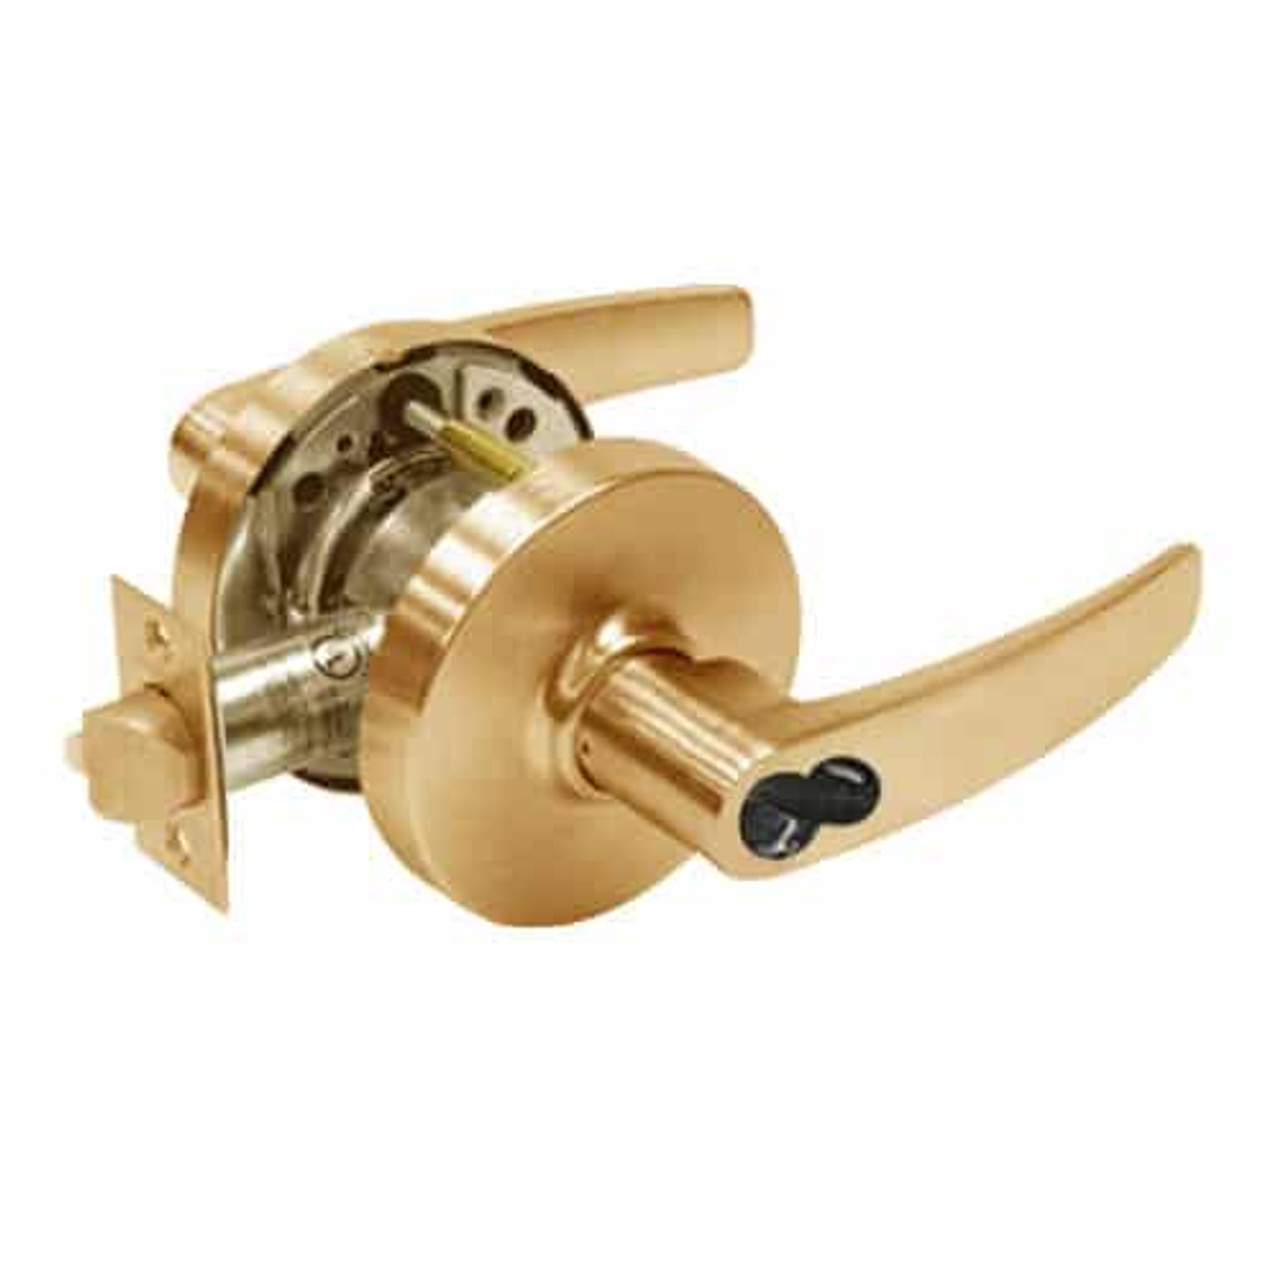 2860-10G38-LB-10 Sargent 10 Line Cylindrical Classroom Locks with B Lever Design and L Rose Prepped for LFIC in Dull Bronze